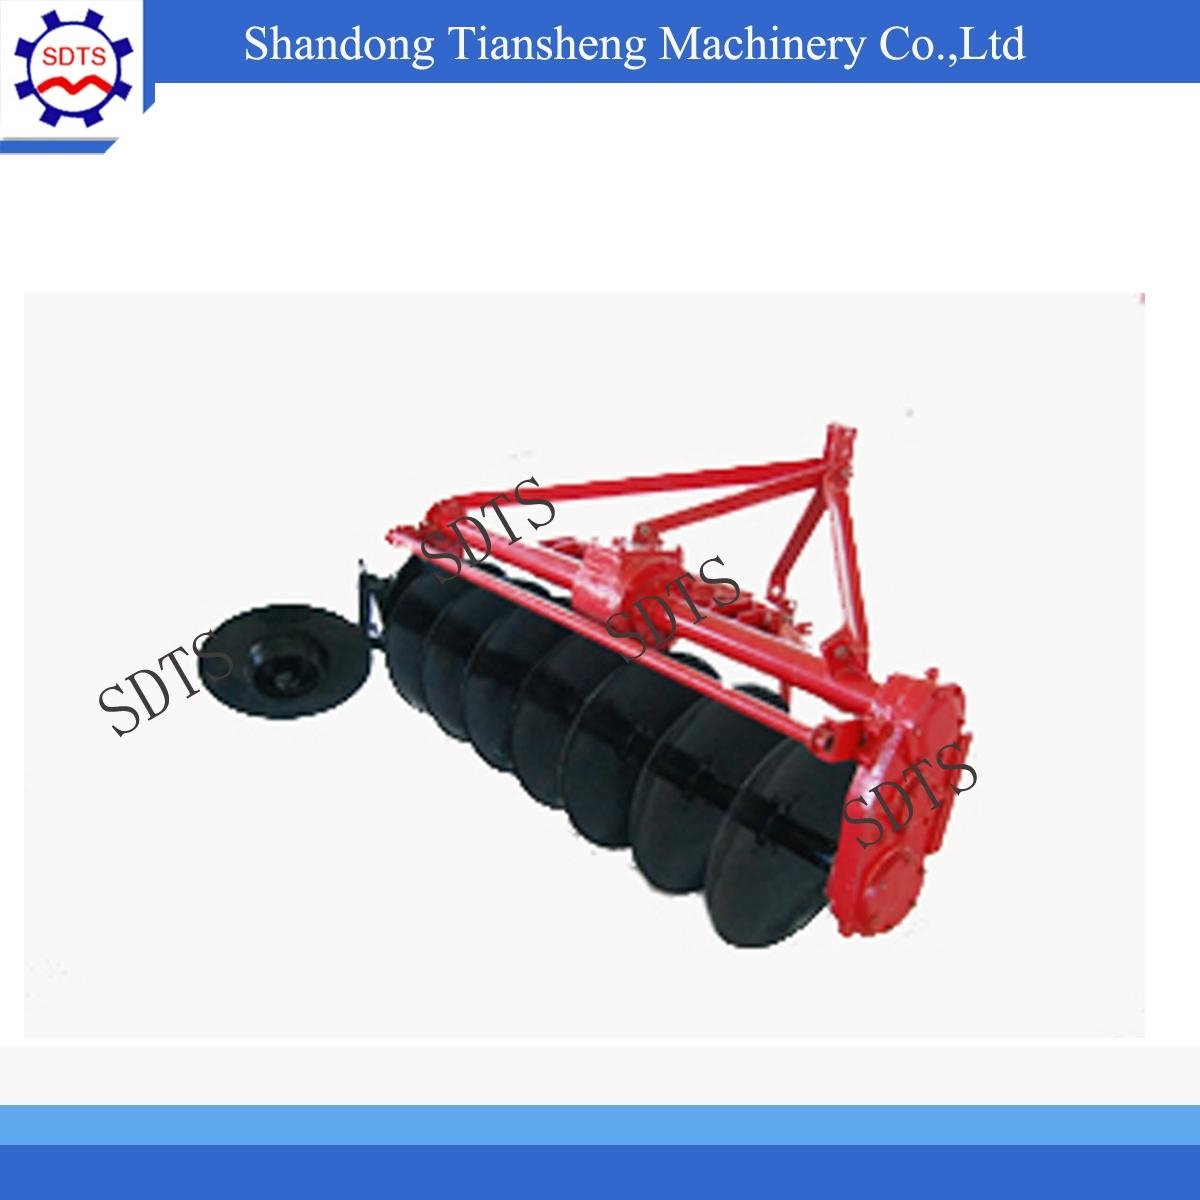 1LYQ-722 Farming rotary-driven Driven disc plow plough made in China